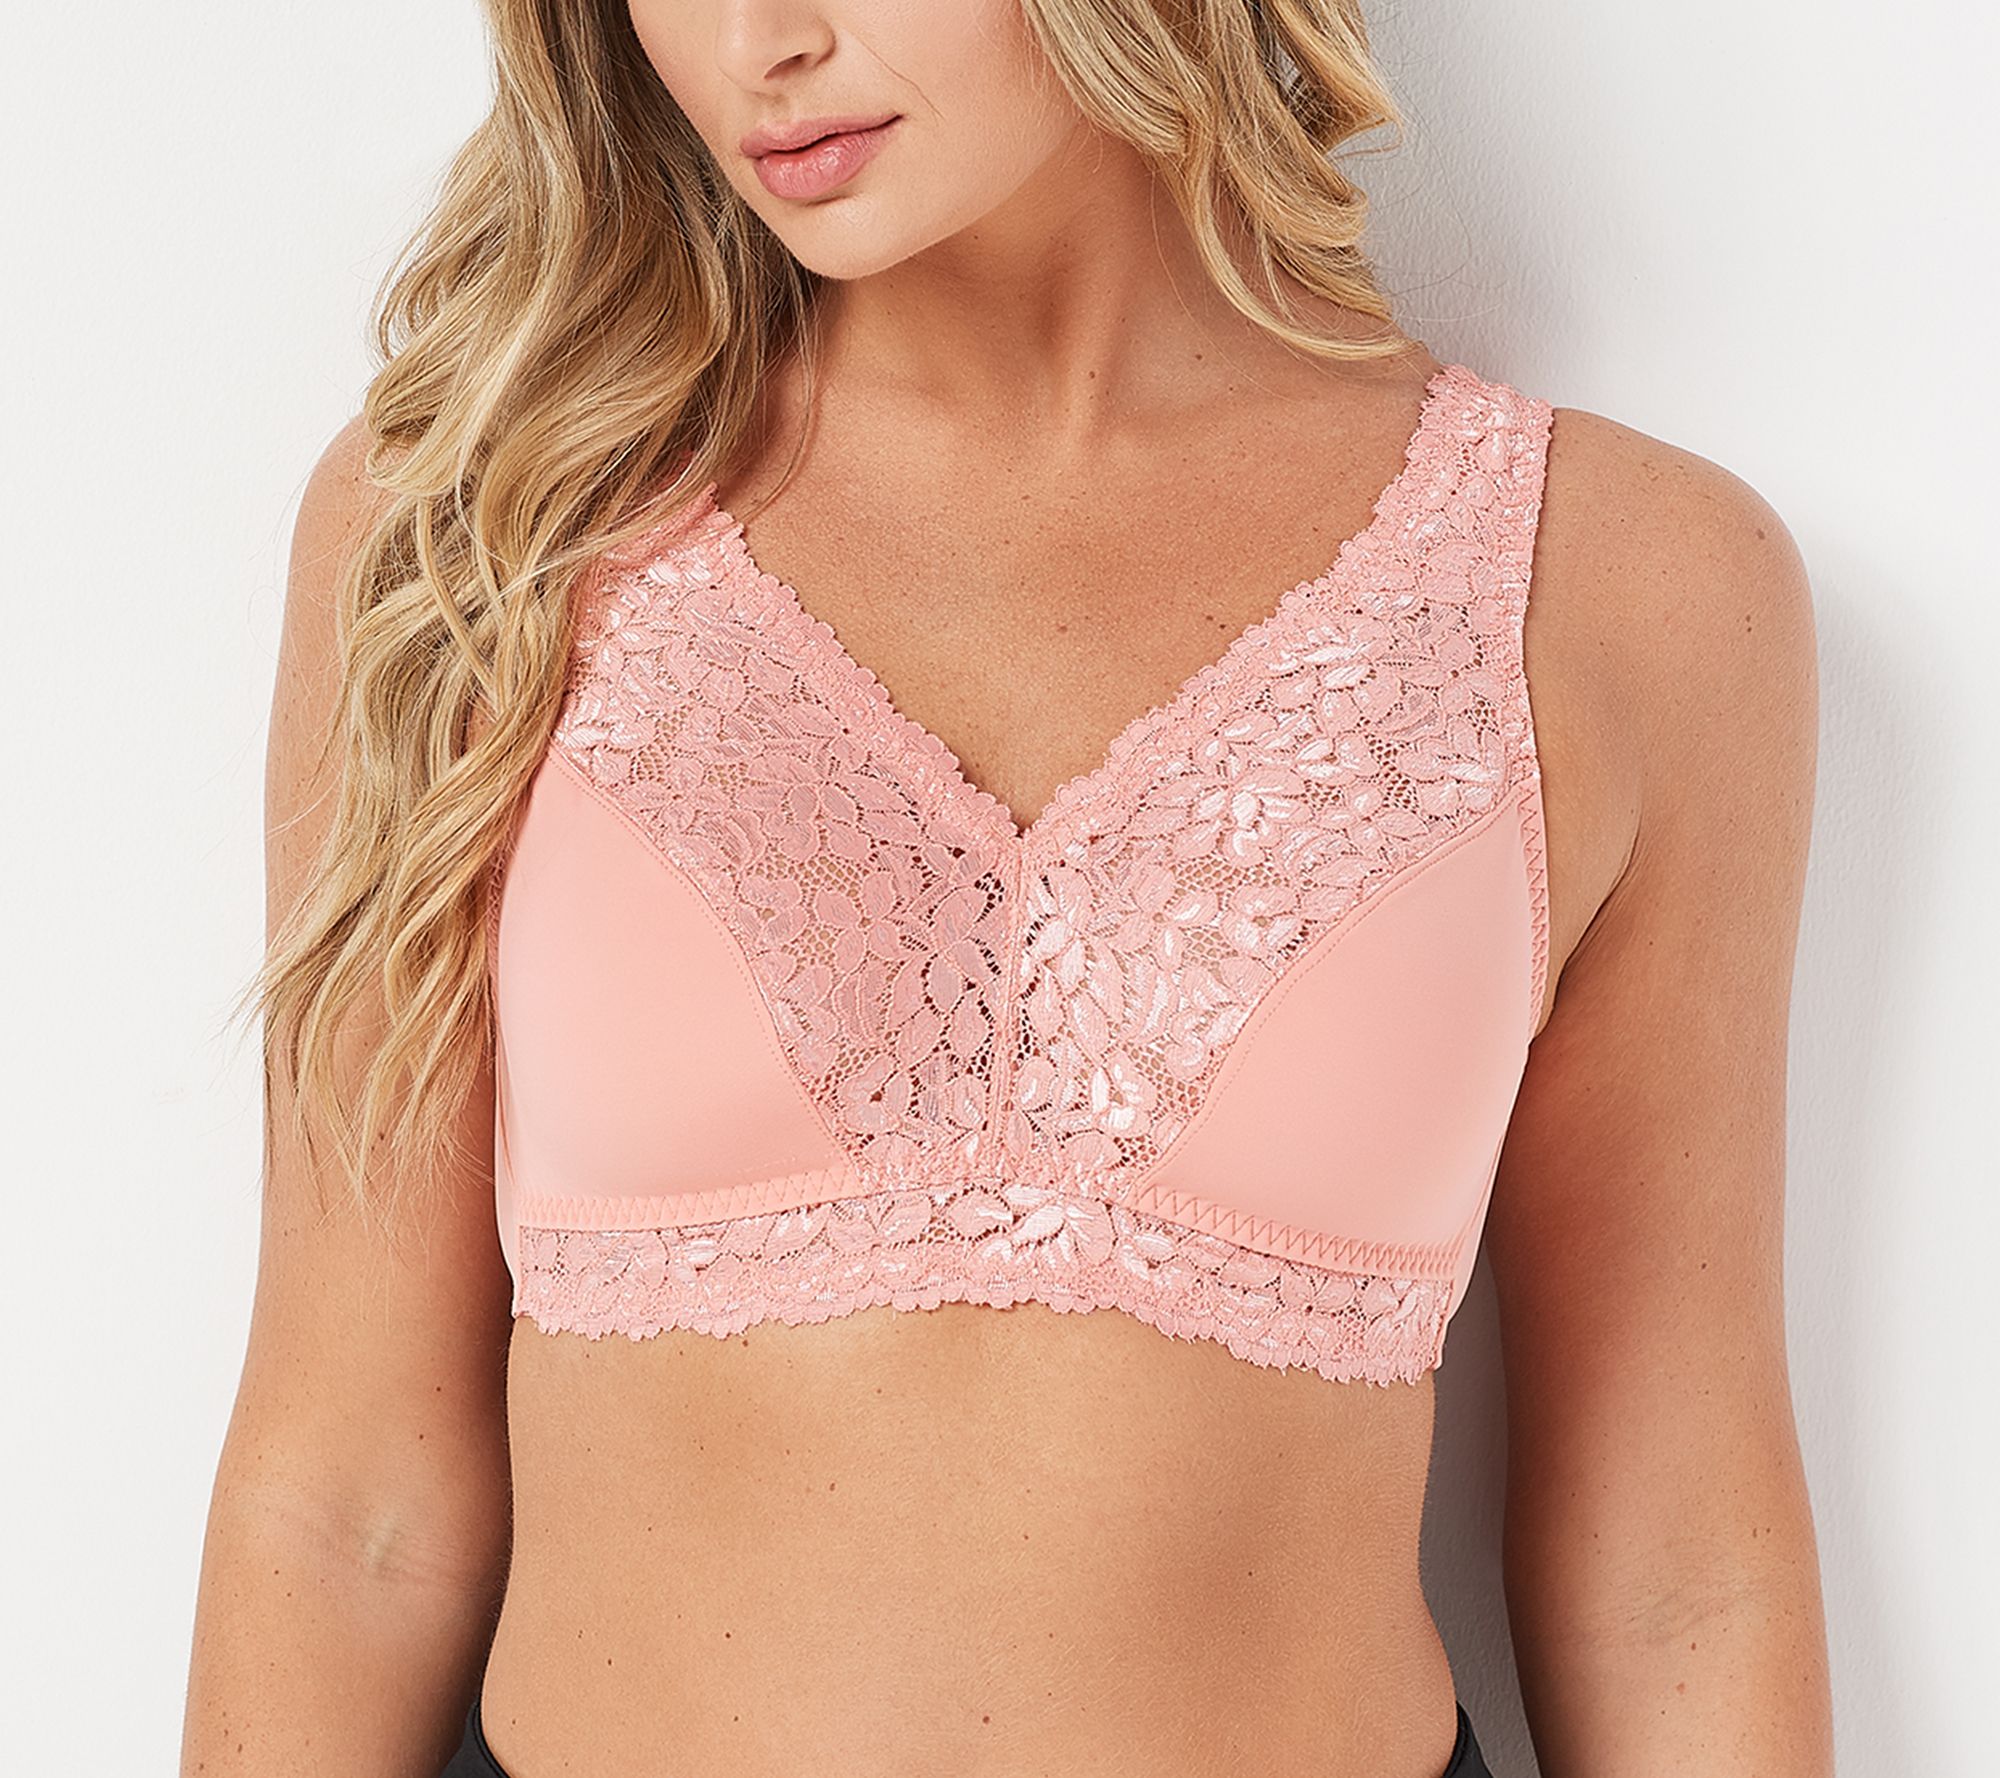 Breezies Lace Underwire Bra Multiple Size 48 C - $14 - From Shannon